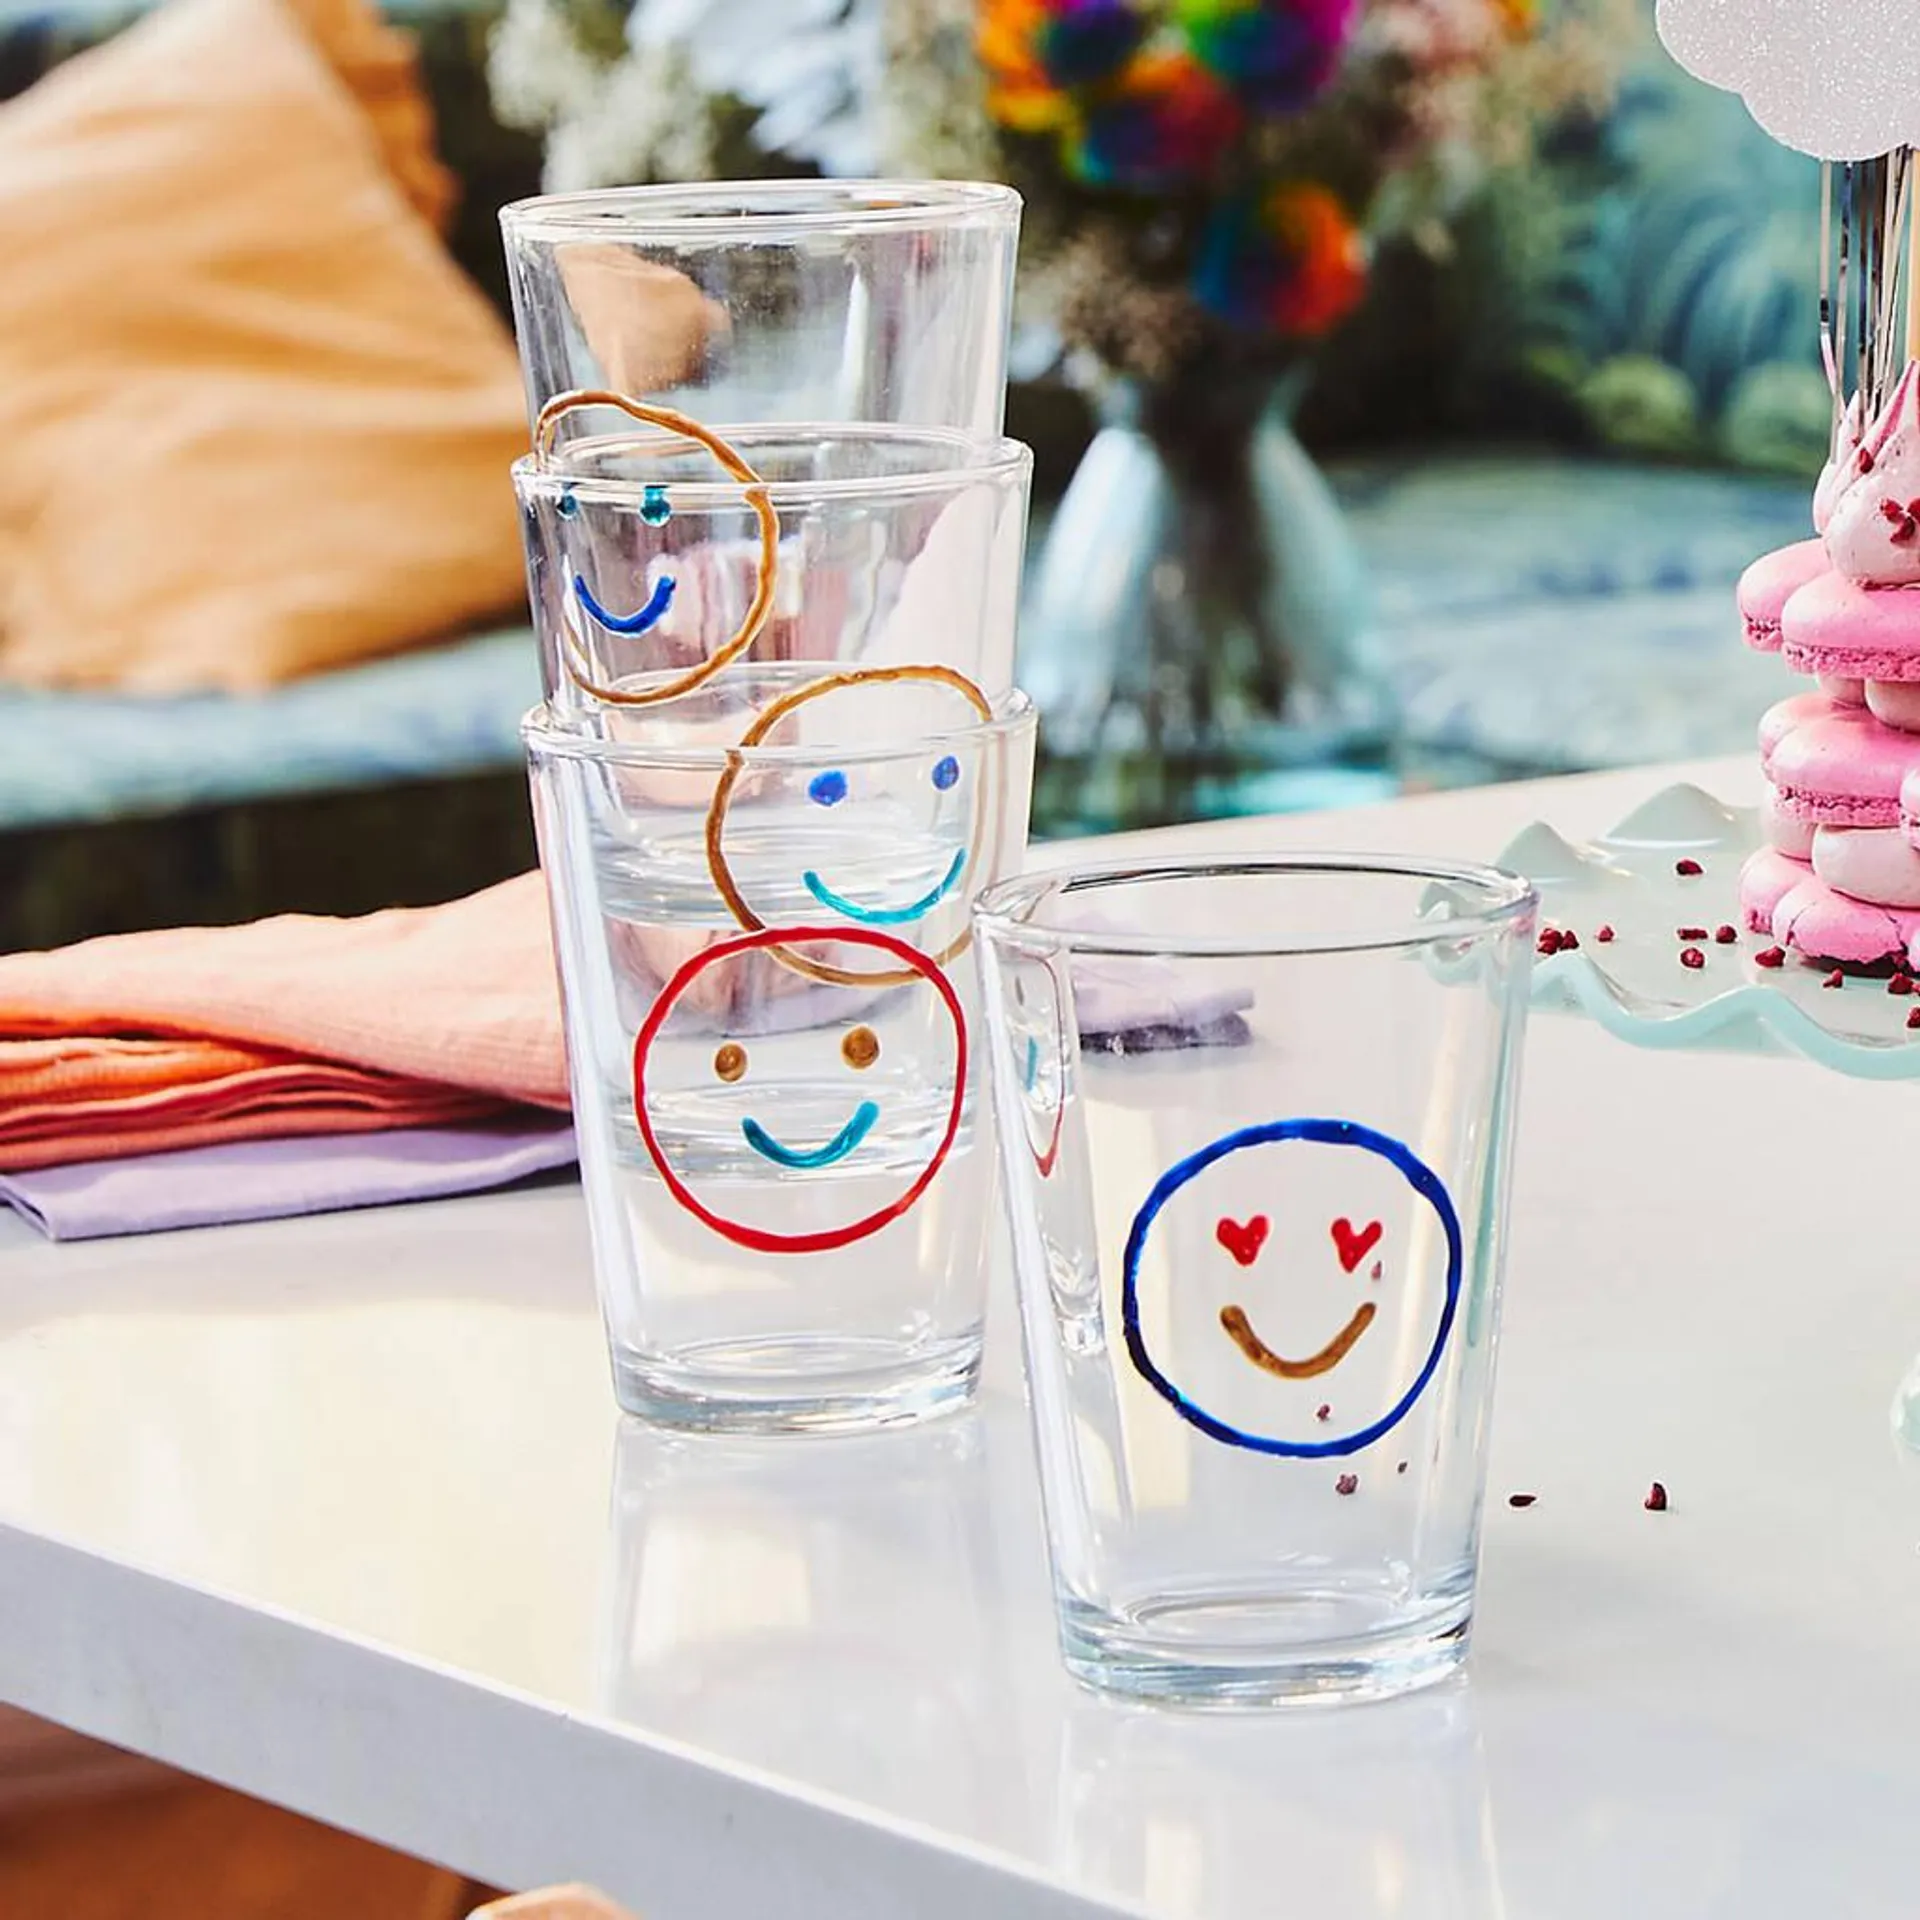 Smiley Face Glass